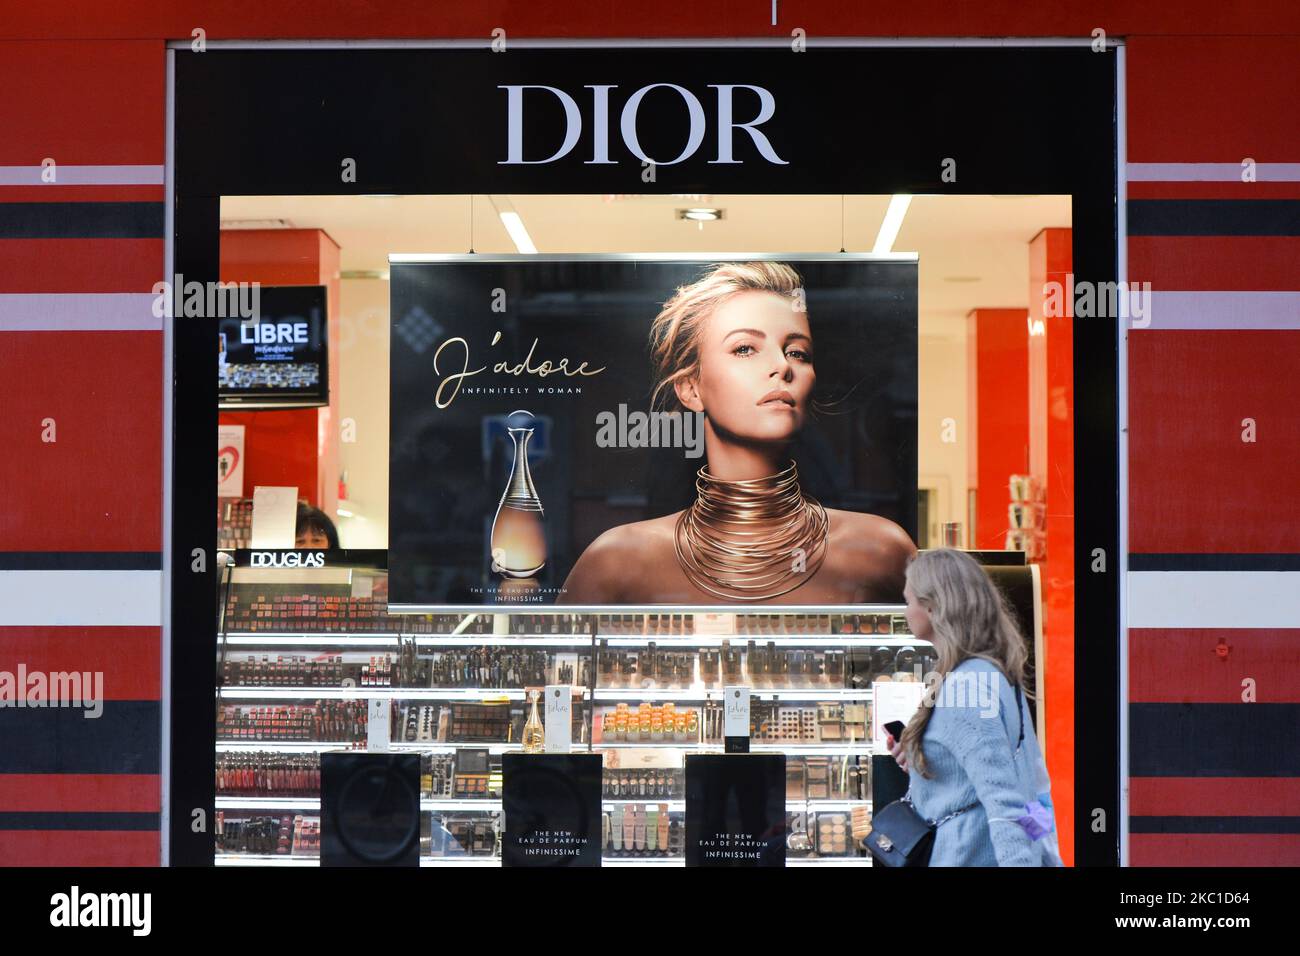 A lady passes by Christian Dior SE shop window, commonly known as Dior, a  French luxury goods company controlled and chaired by French businessman  Bernard Arnault, seen in Sofia city center. On